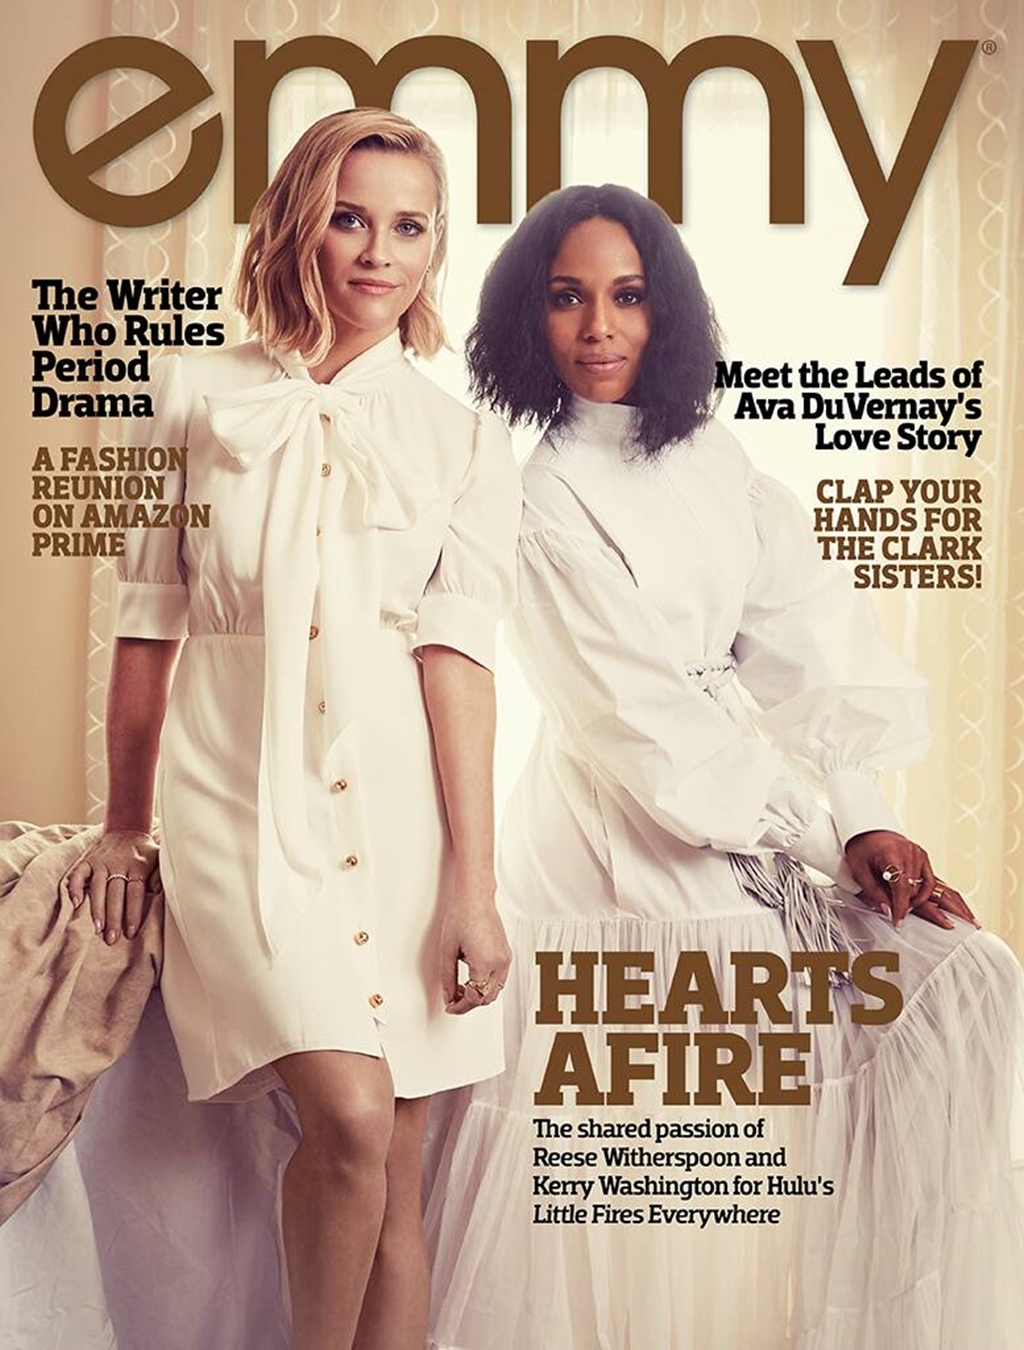 FOTOS Reese Witherspoon y Kerry Washington No Distancing social!